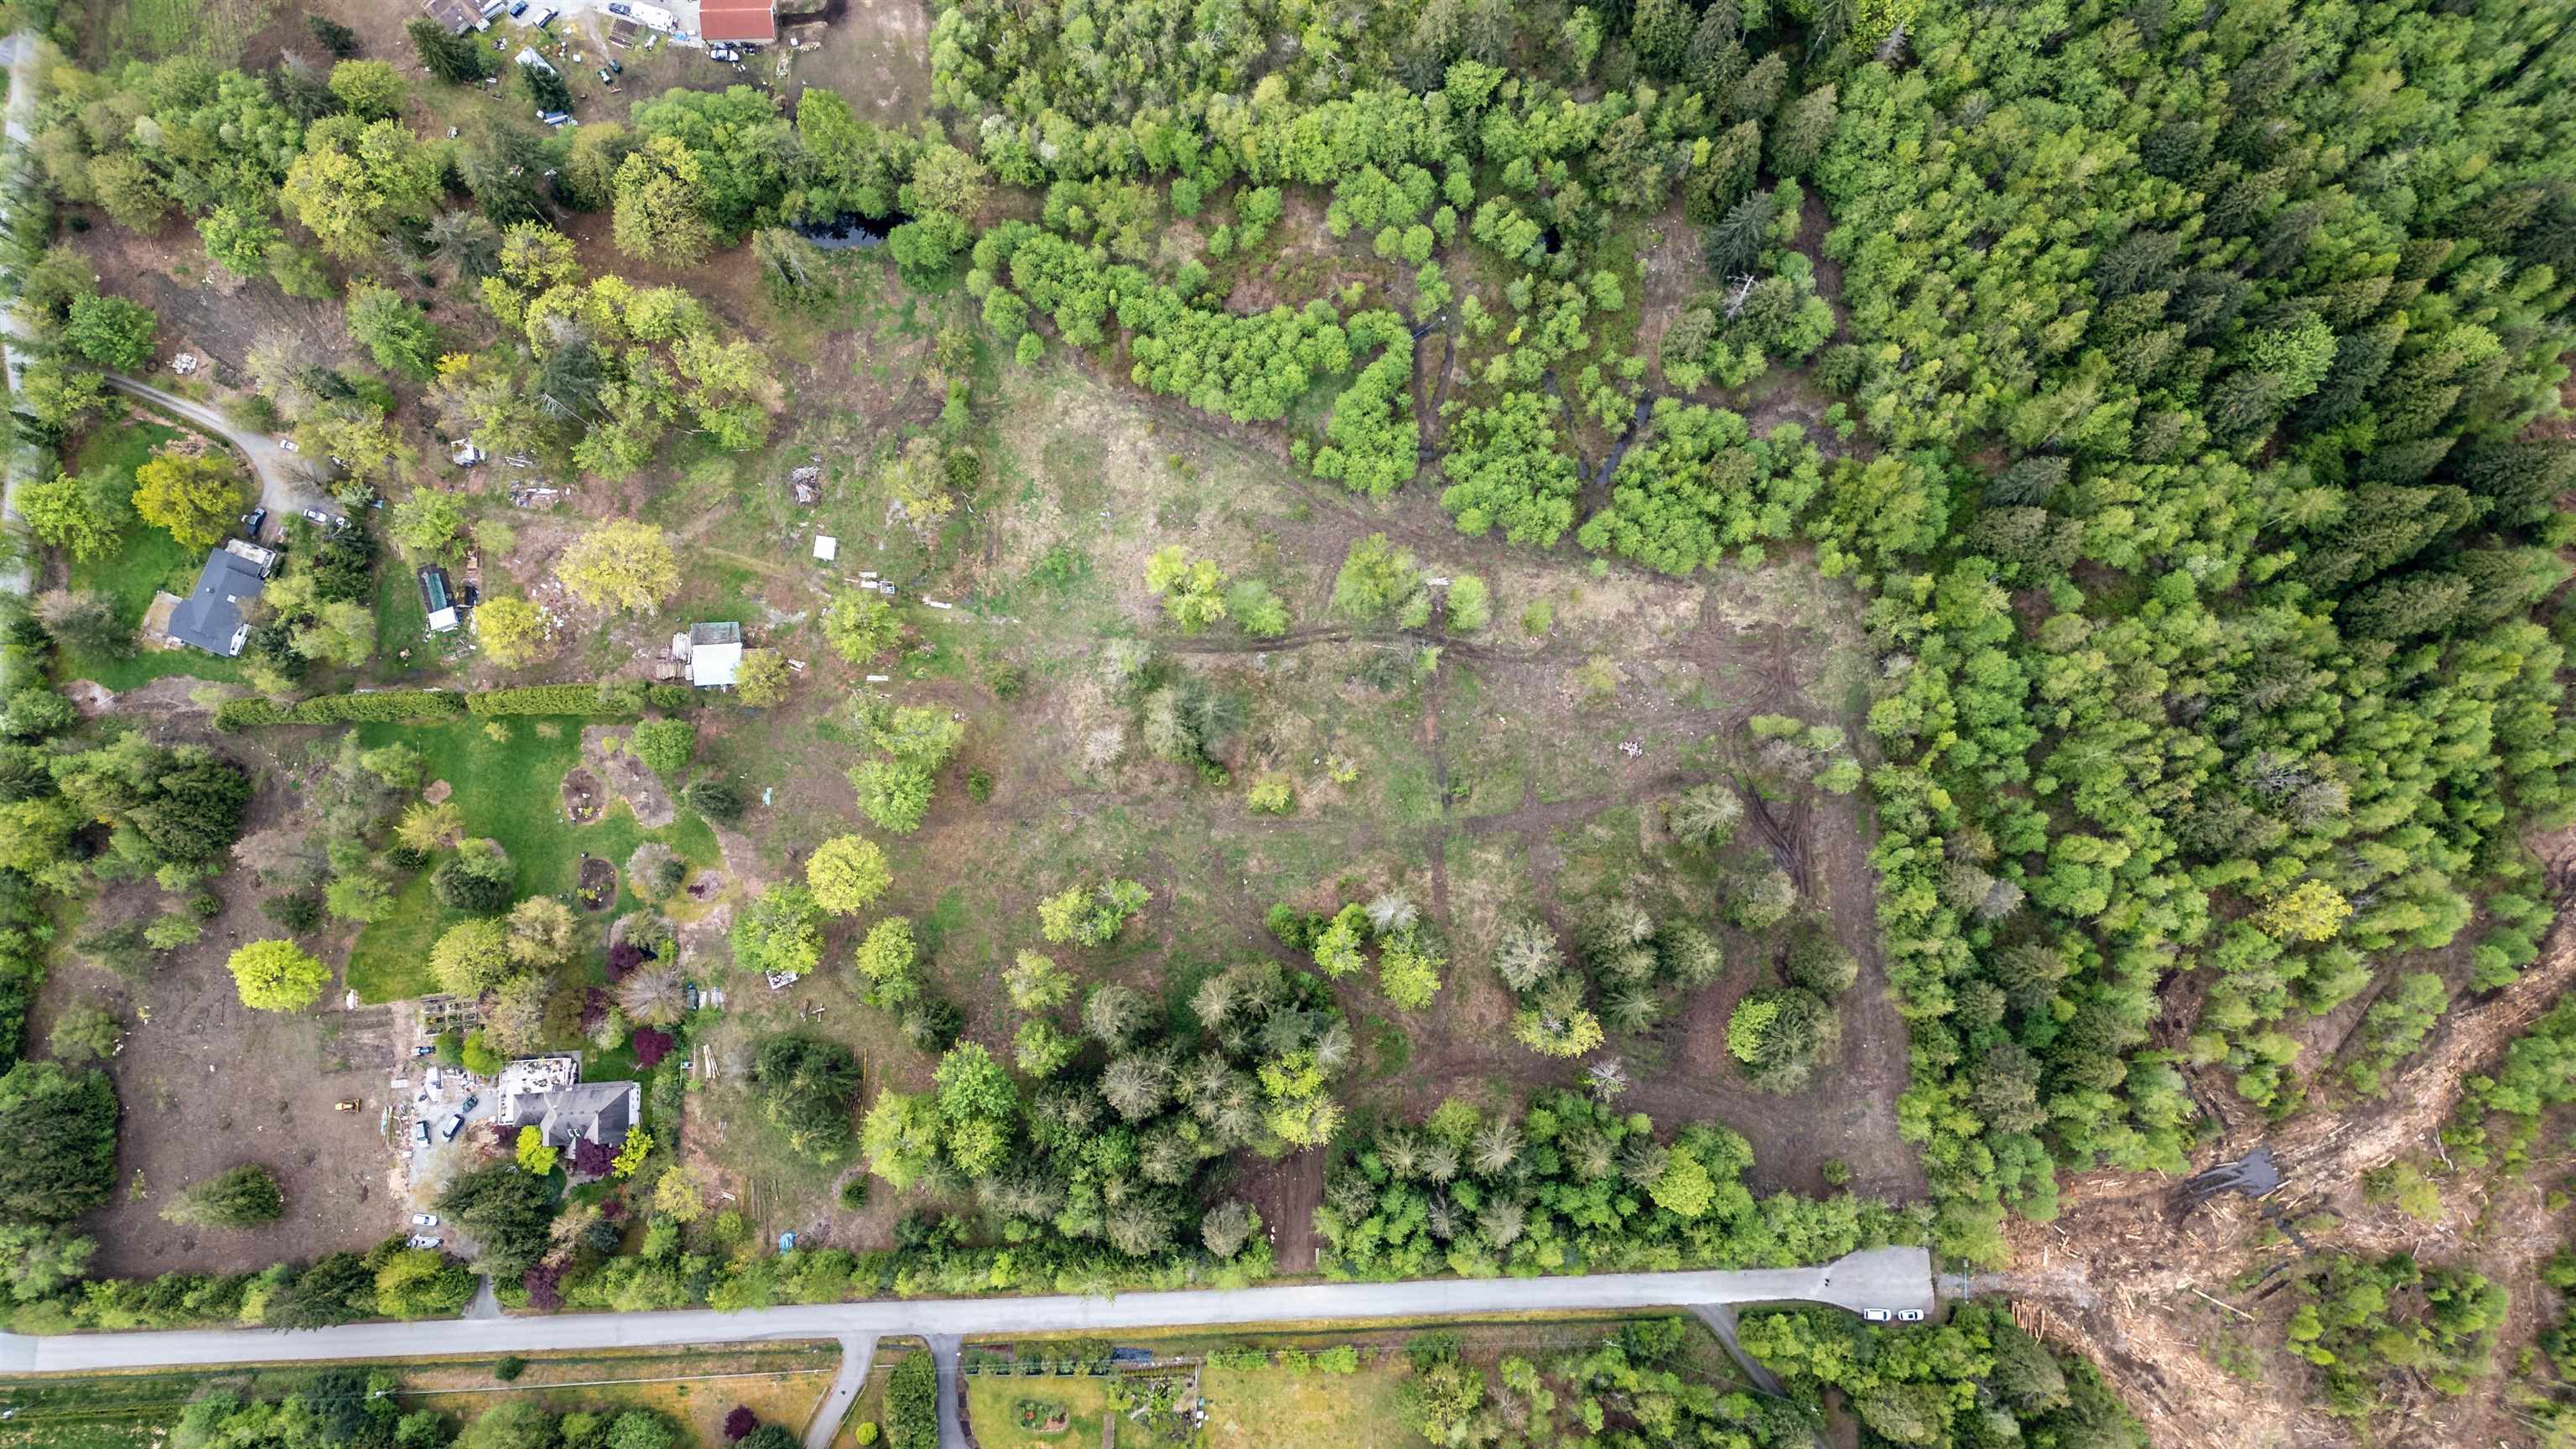 10535 287, Maple Ridge, British Columbia, ,Land Only,For Sale,R2879960